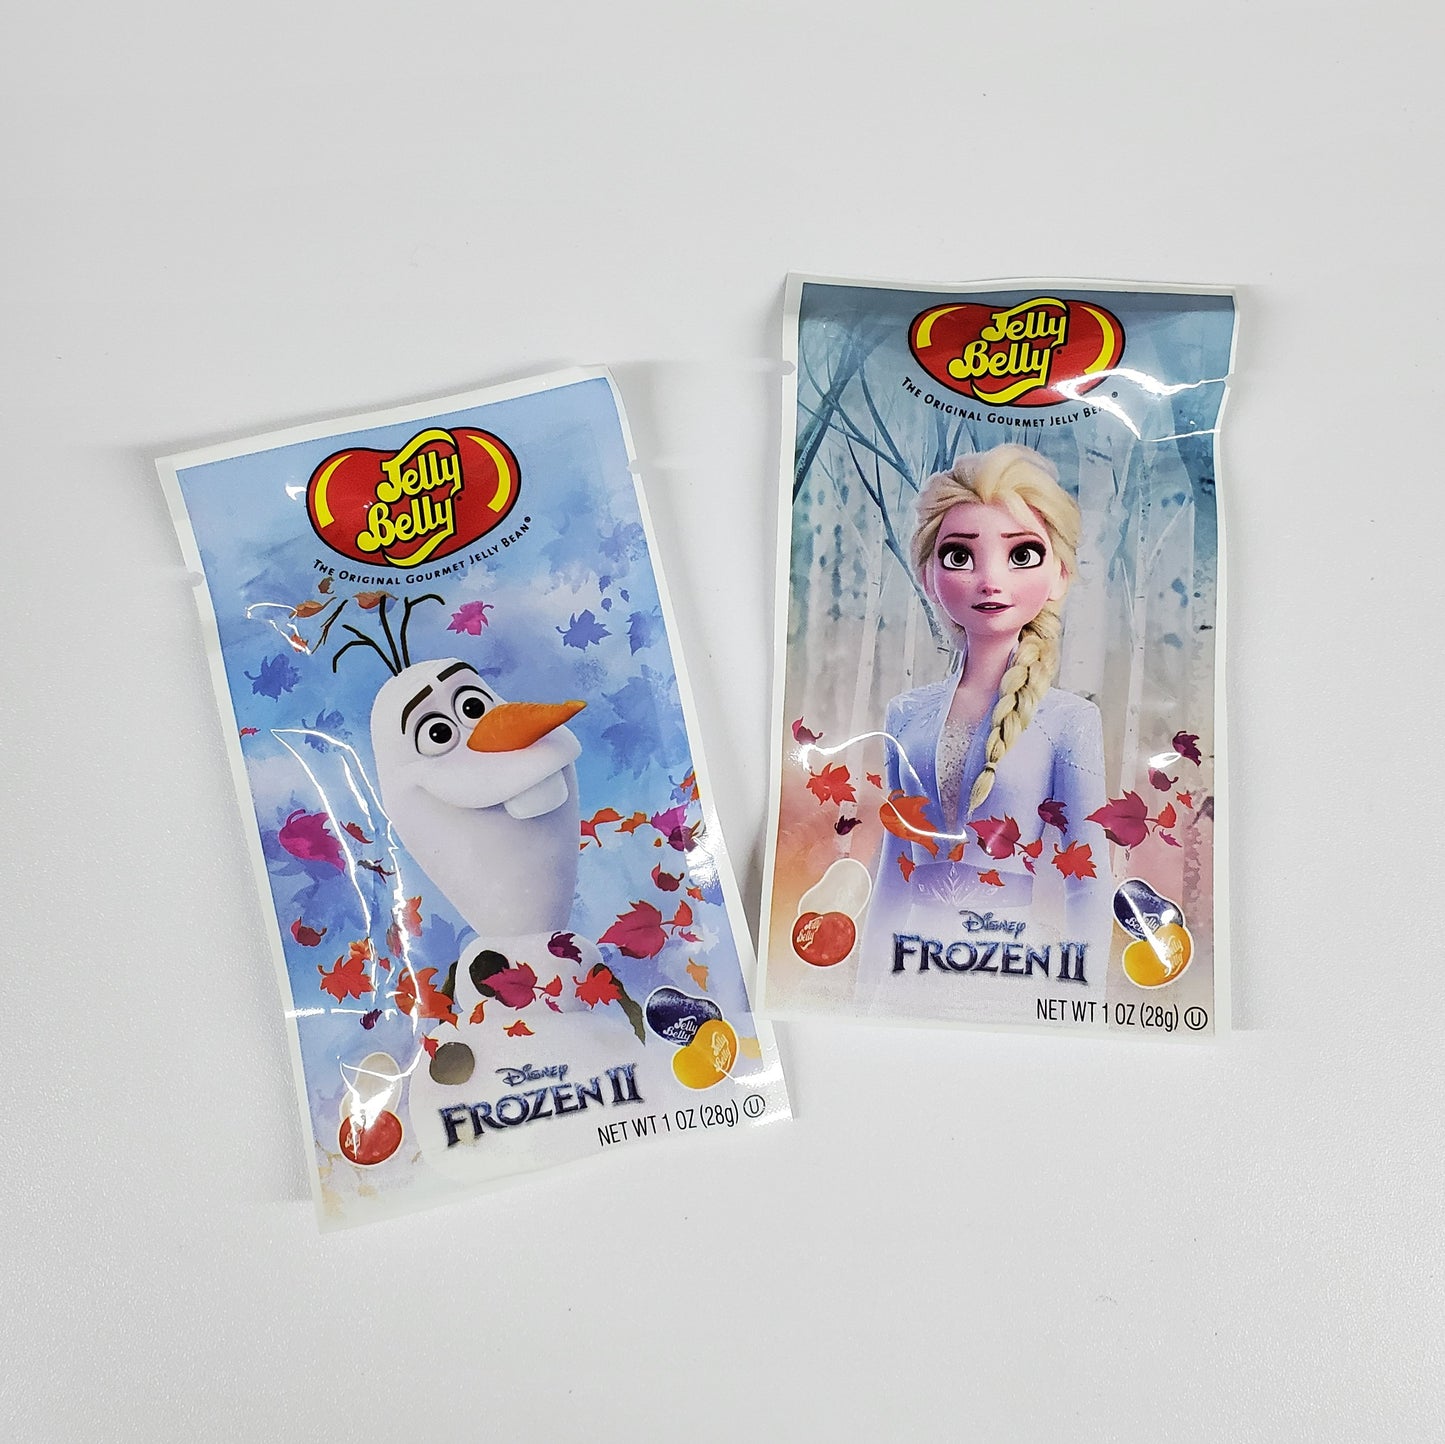 1oz Jelly Belly Jelly Beans Packages with images from Frozen 